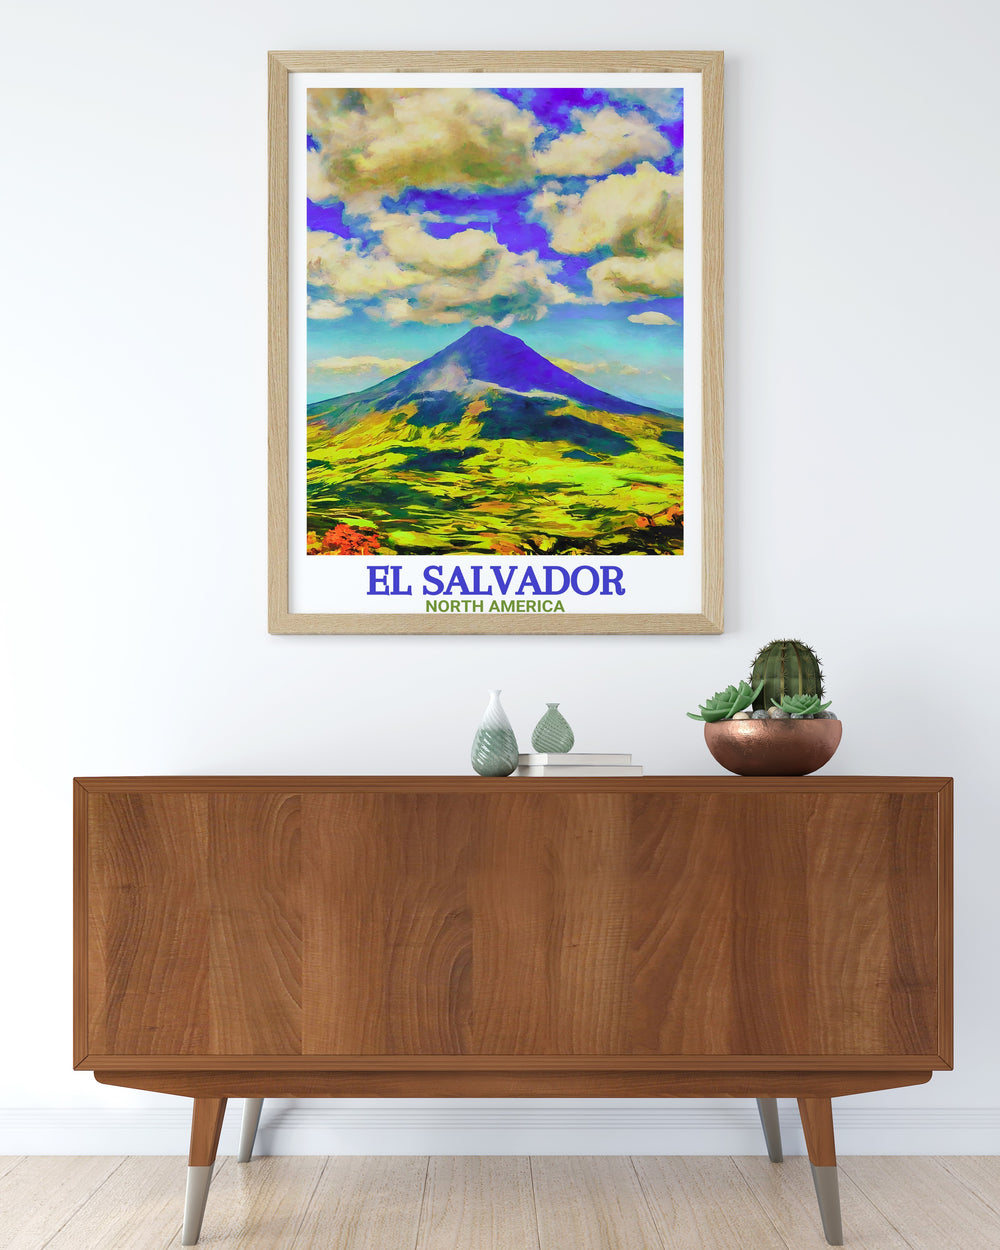 El Salvador print of Santa Ana Volcano highlighting the grandeur and rugged landscape ideal for wall art enthusiasts who appreciate natures beauty a travel poster print that adds elegance and charm to any room with its vivid colors and detailed depiction